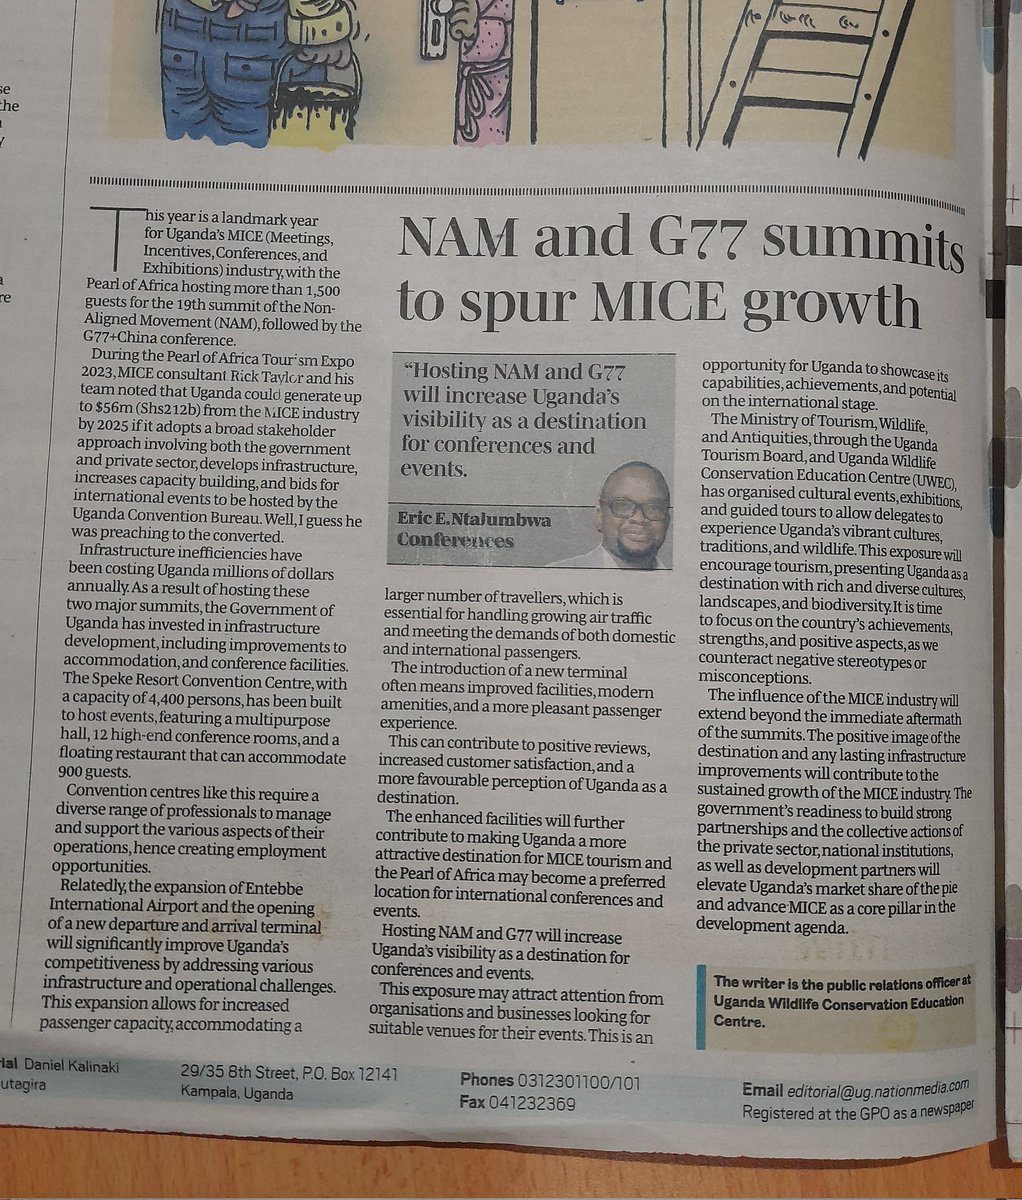 'It's time to focus on country's achievements, strengths & positive aspects as we counteract negative stereotypes or misconceptions. The influence of MICE Industry will extend beyond immediate aftermath of summits.' @EricNtalo @UWEC_EntebbeZoo @DailyMonitor @GCICMediaReview